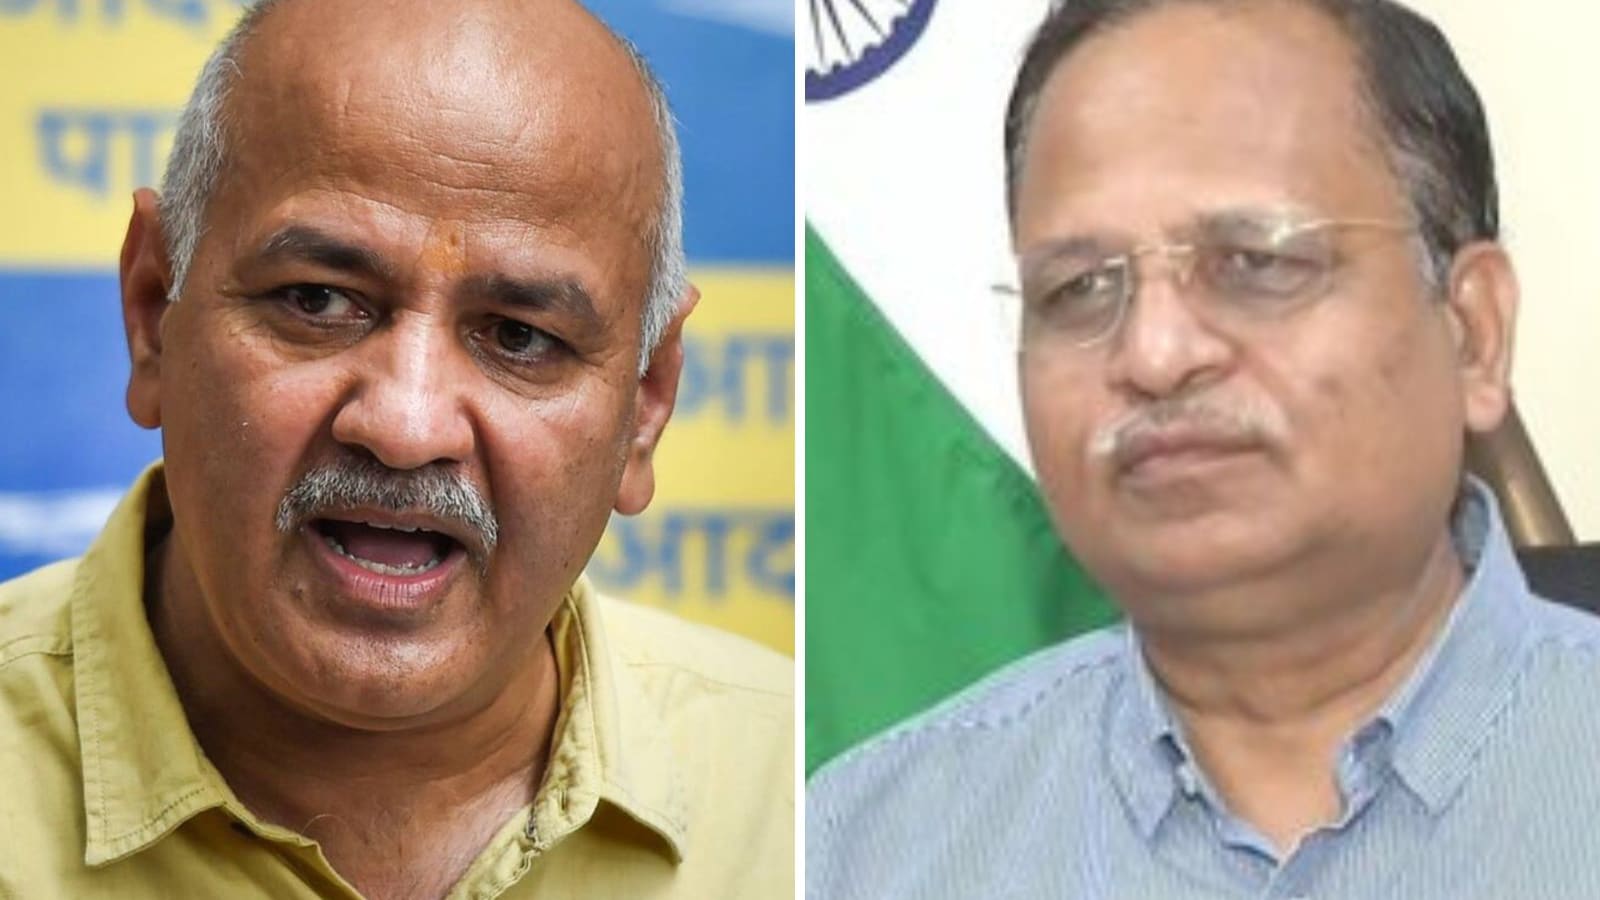 2 New Ministers to Be Appointed Soon: AAP Leader Following Sisodia, Jain’s Resignation